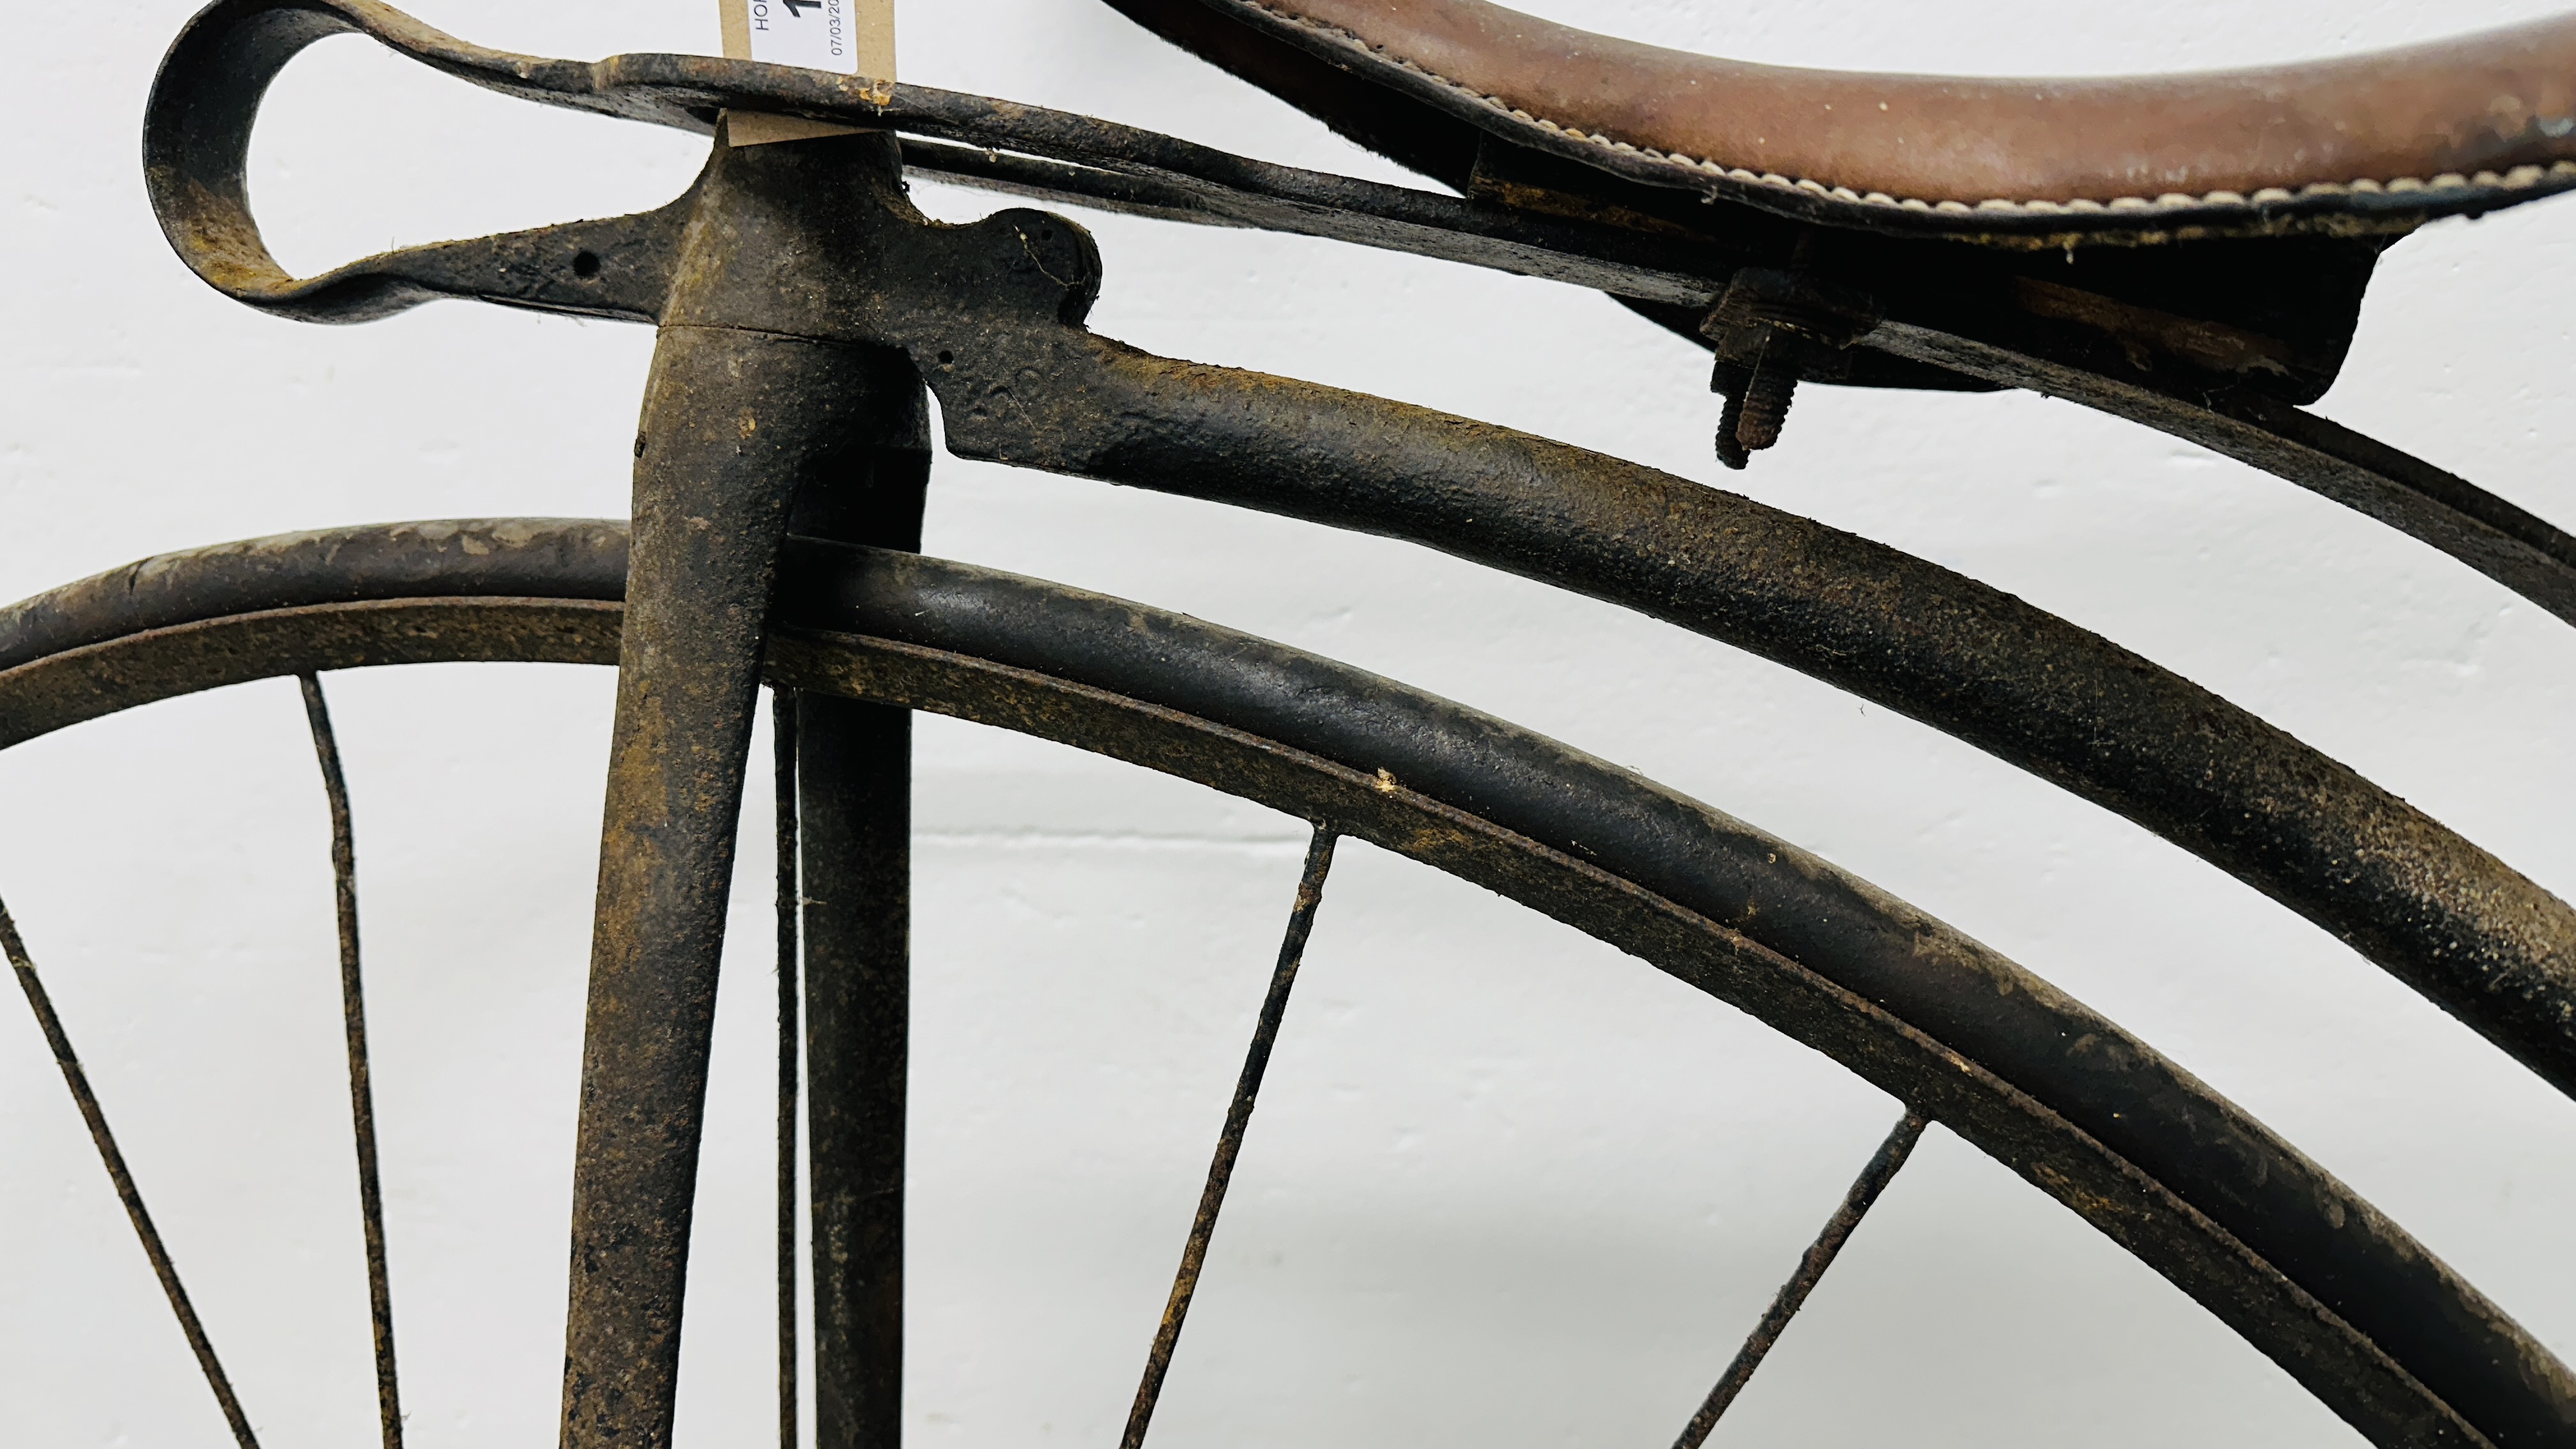 AN ANTIQUE PENNY FARTHING / HIGH WHEEL BICYCLE, HEIGHT 147CM, FRONT WHEEL RIM 119CM. - Image 8 of 20